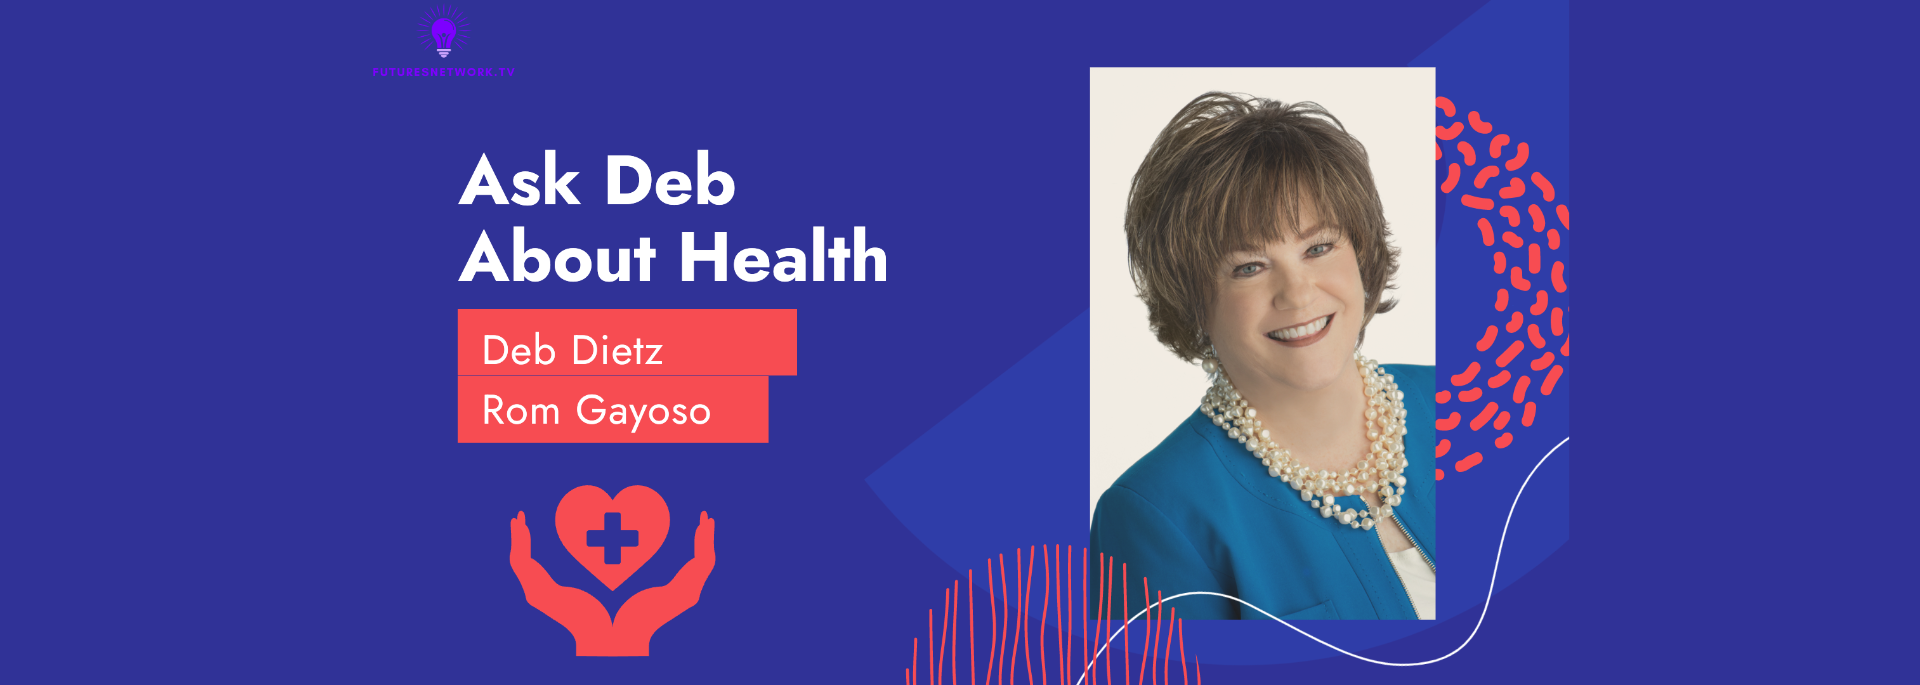 Ask Deb About Health